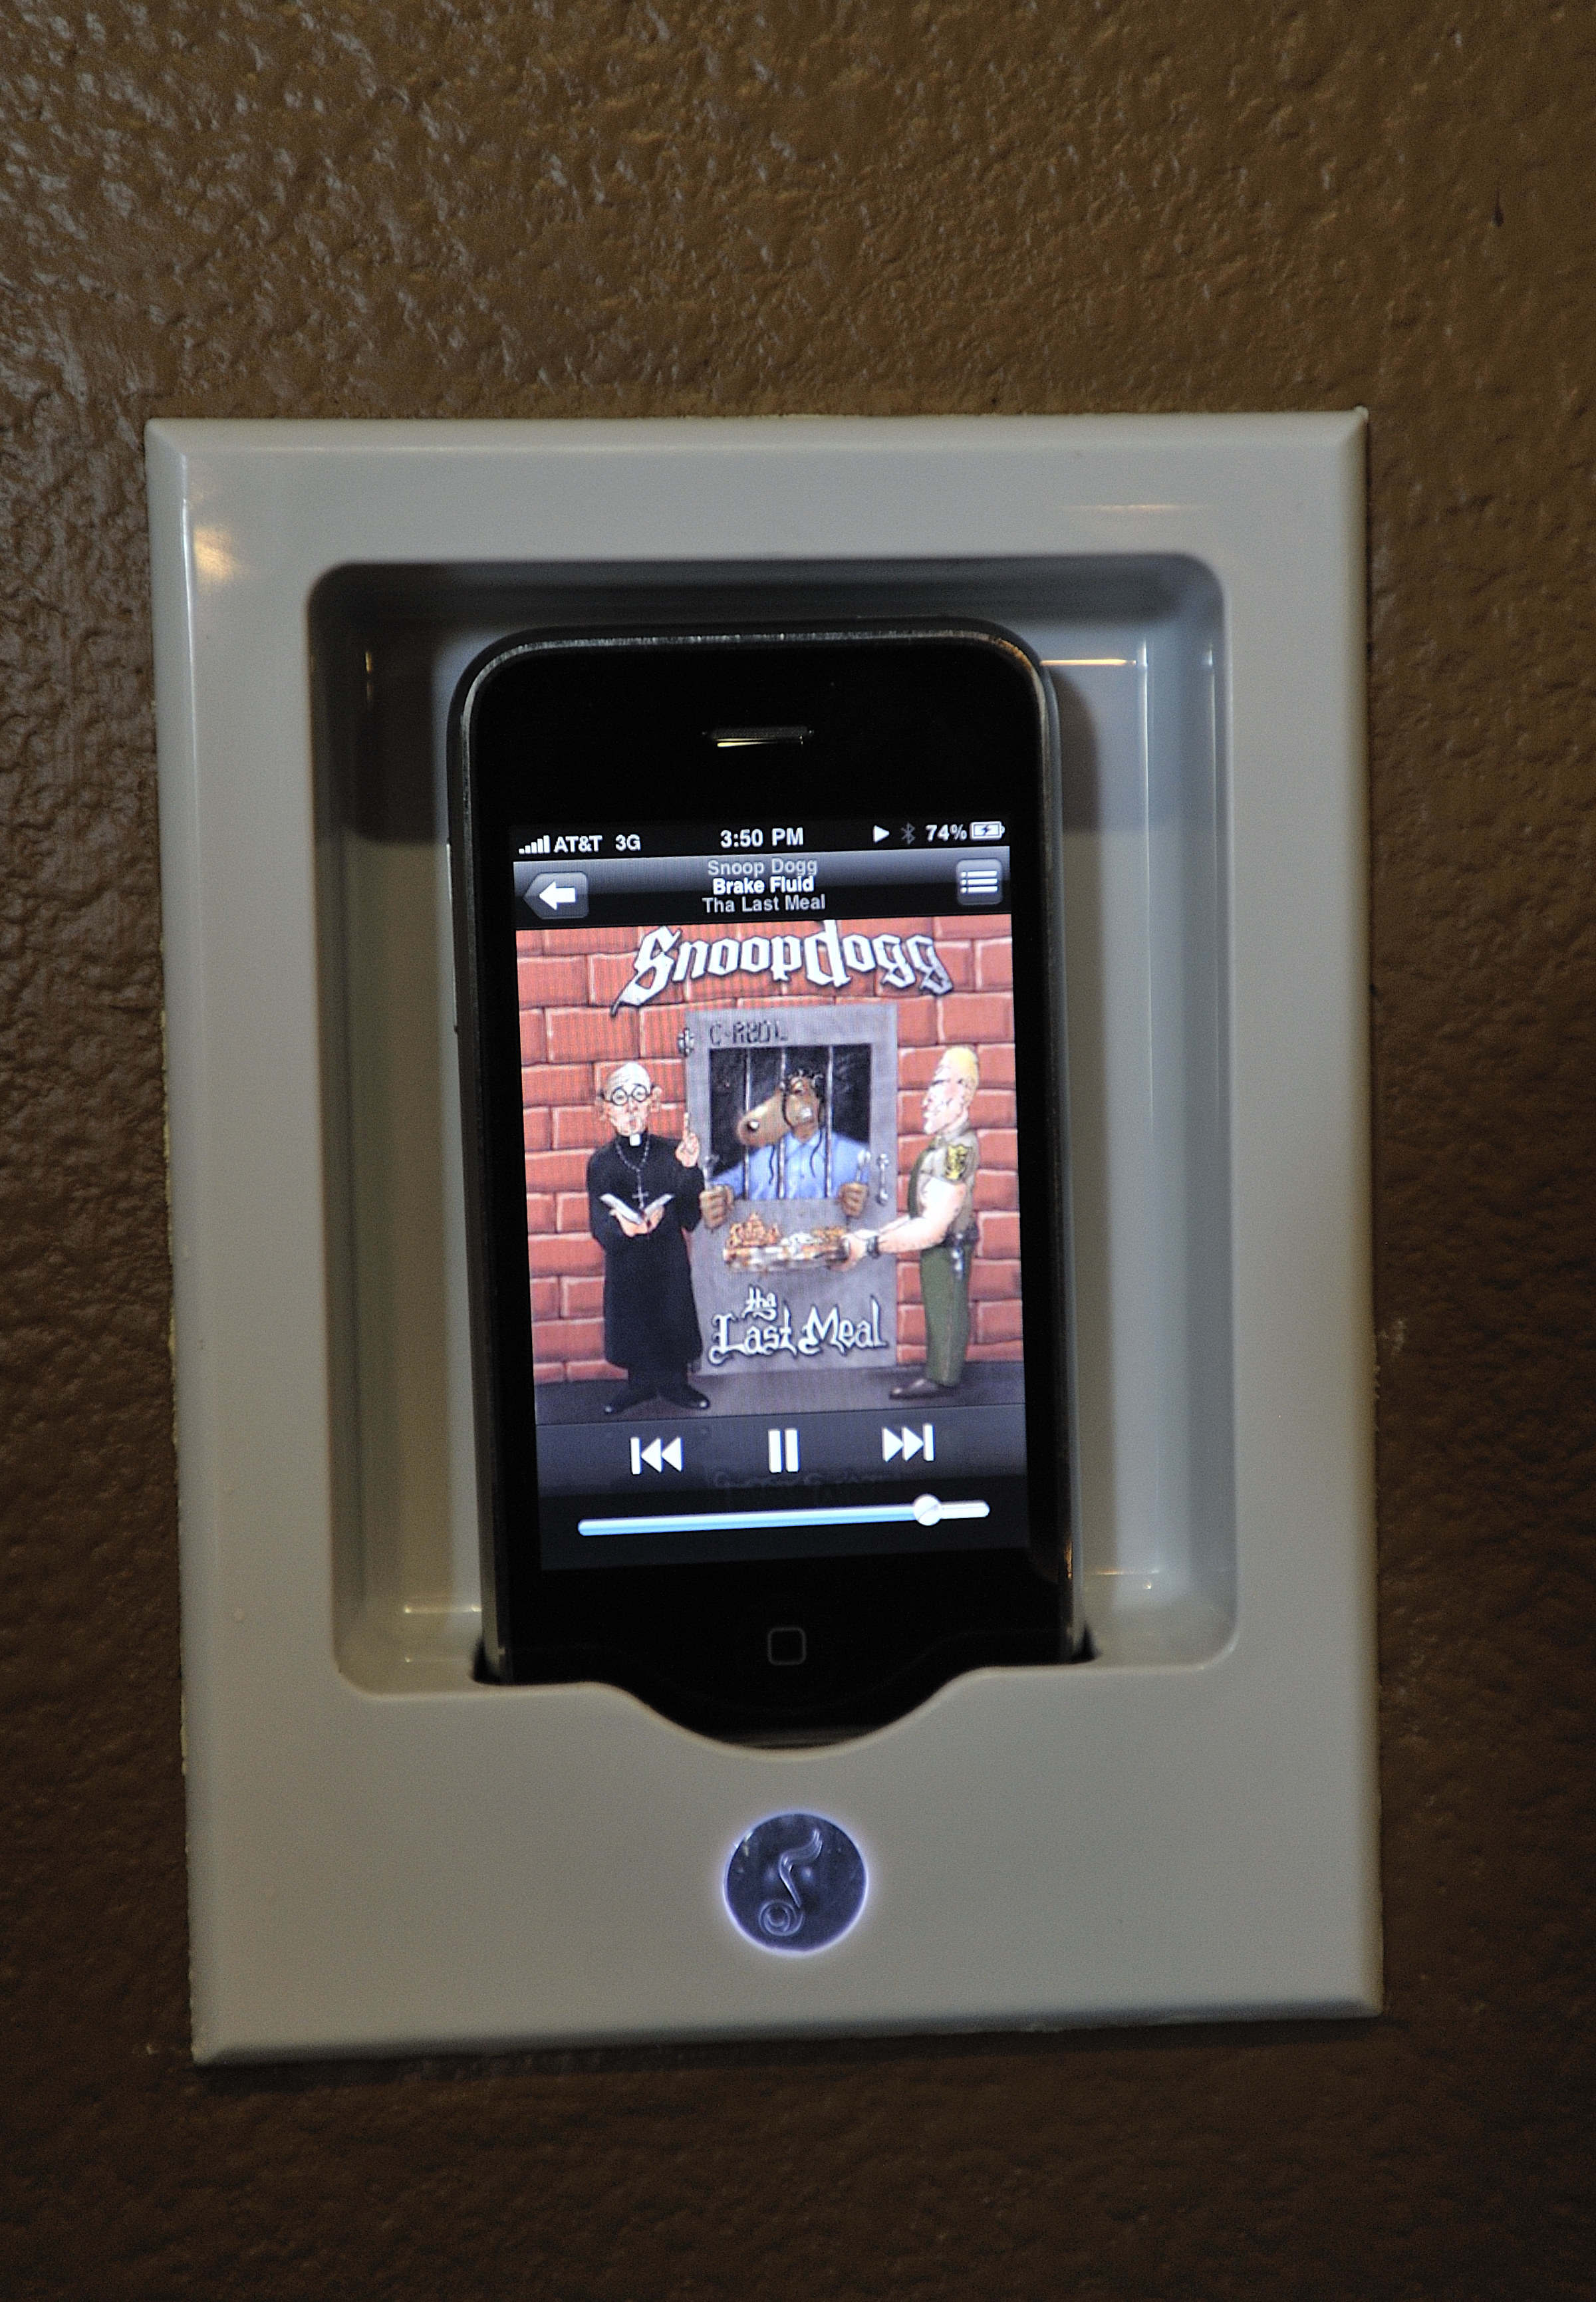 An iPod touch in a wall duck playing Snoop Dogg